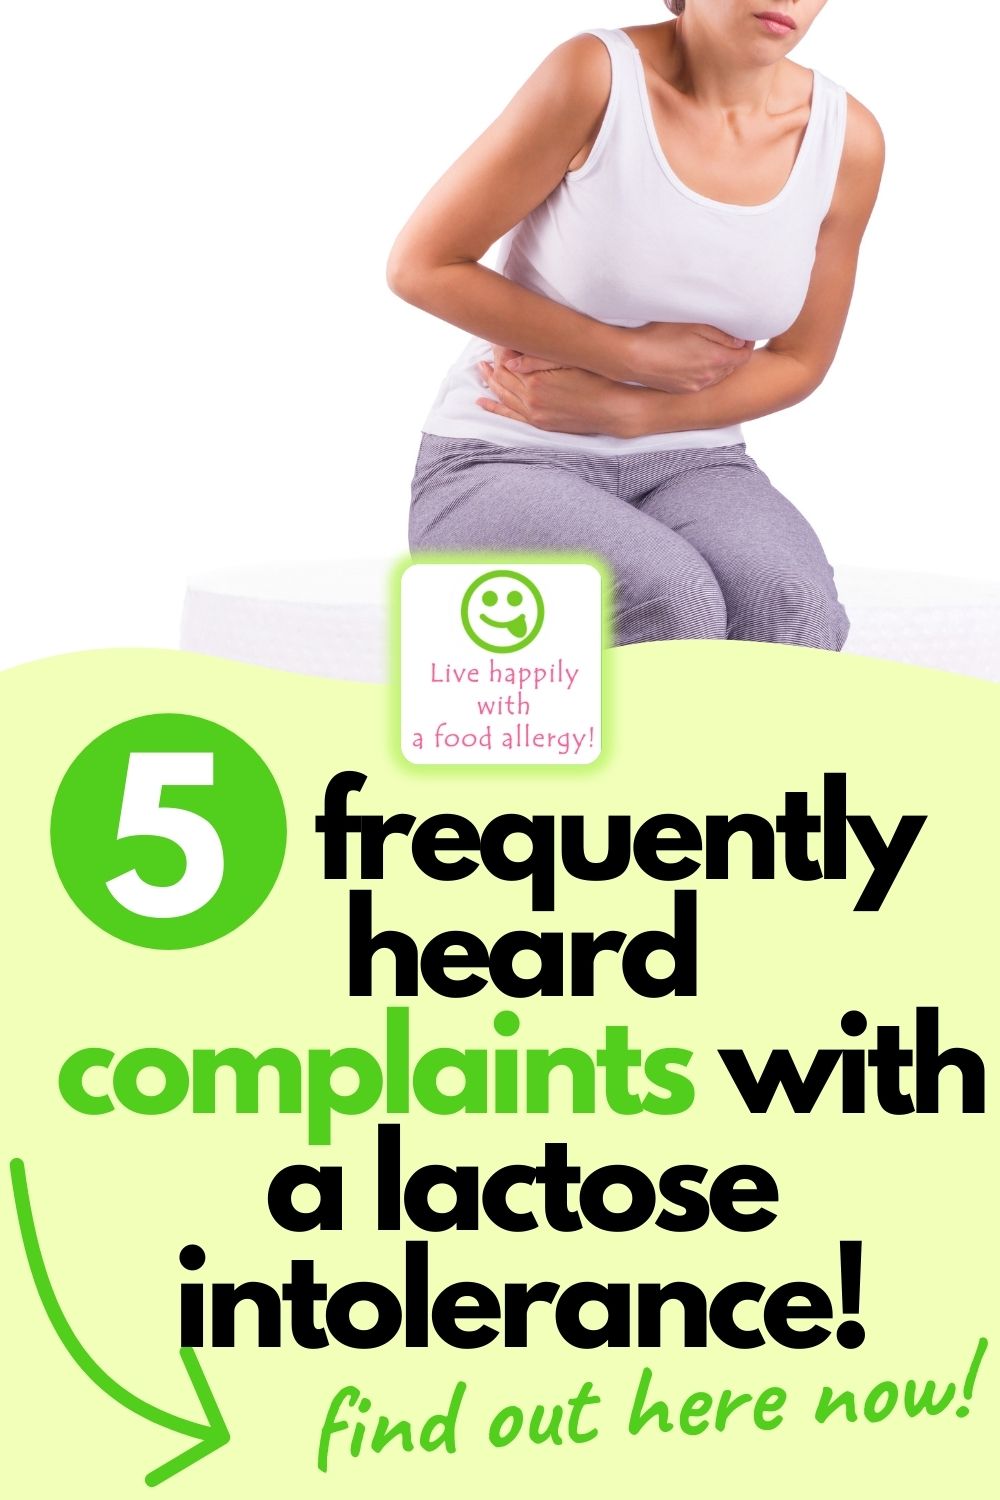 5 frequently heard complaints with a lactose intolerance that are common